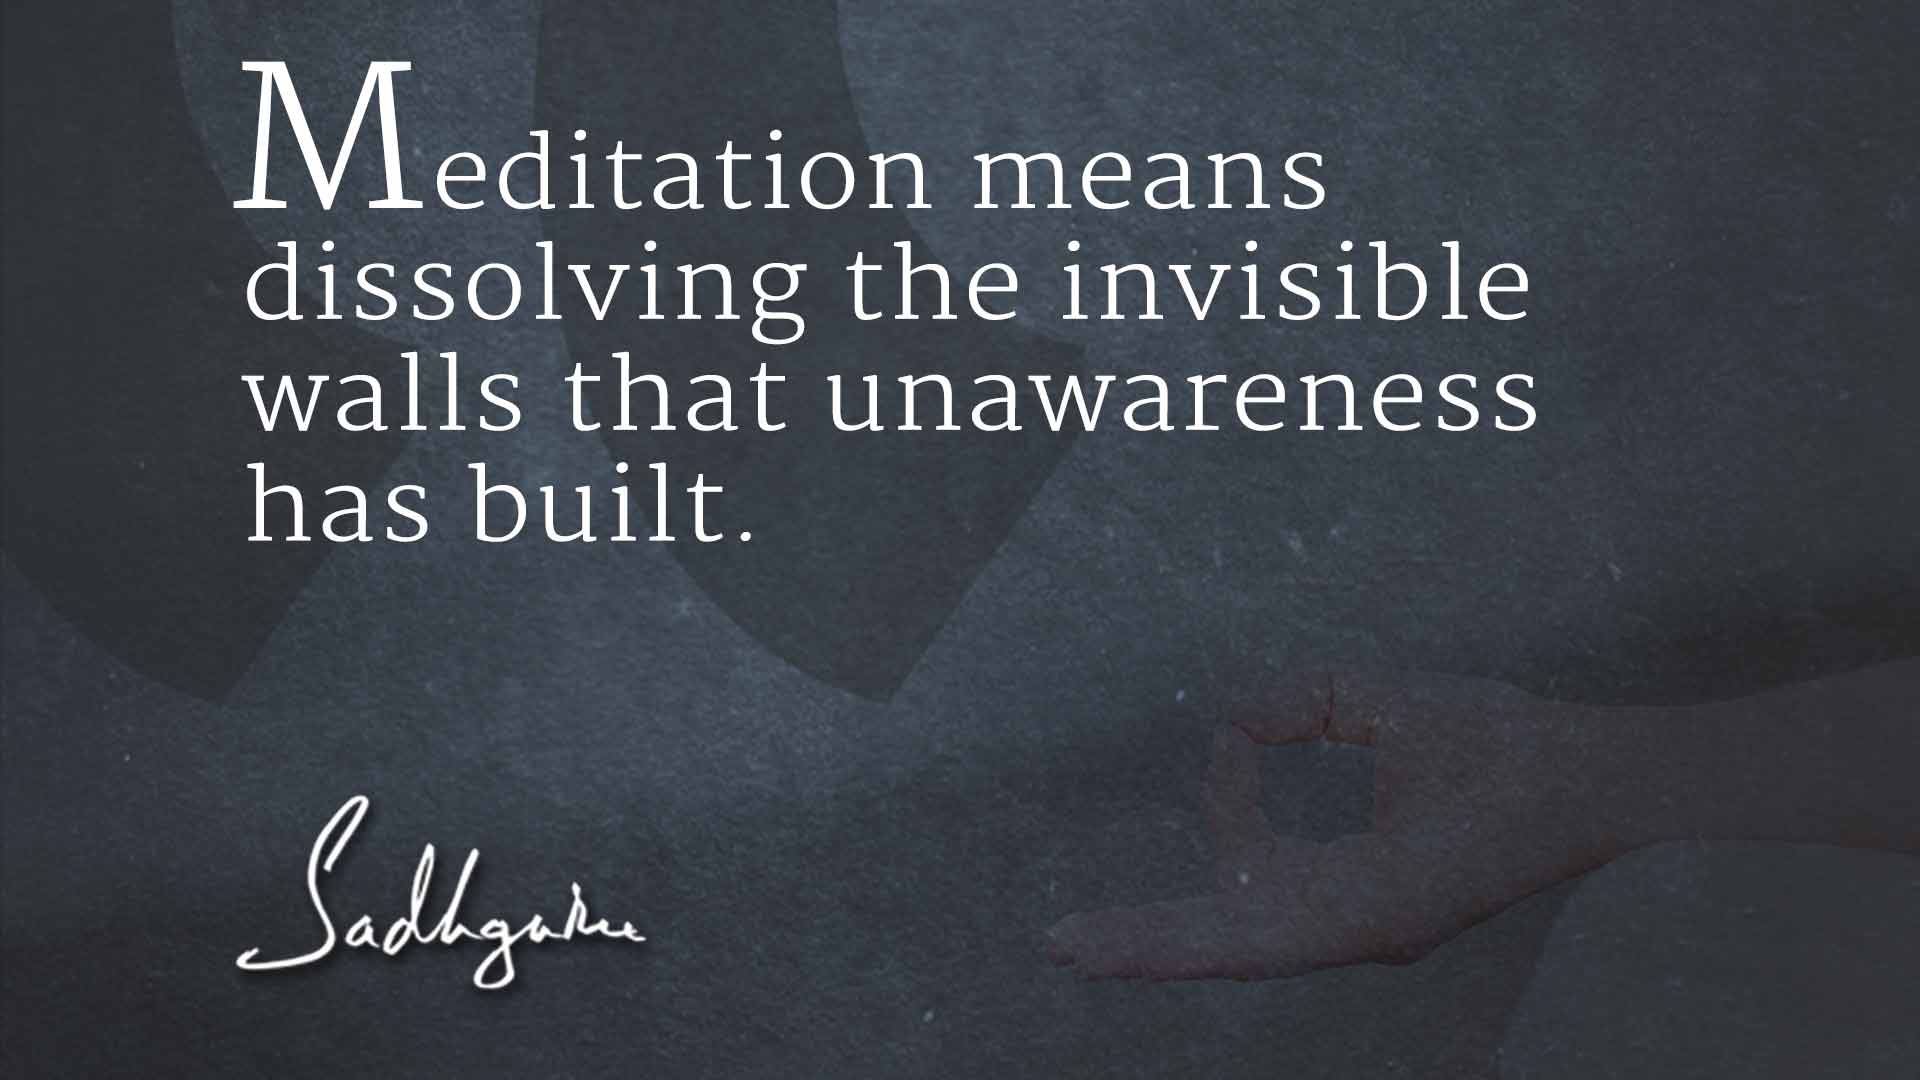 Meditation means dissolving the invisible walls that unawareness has built